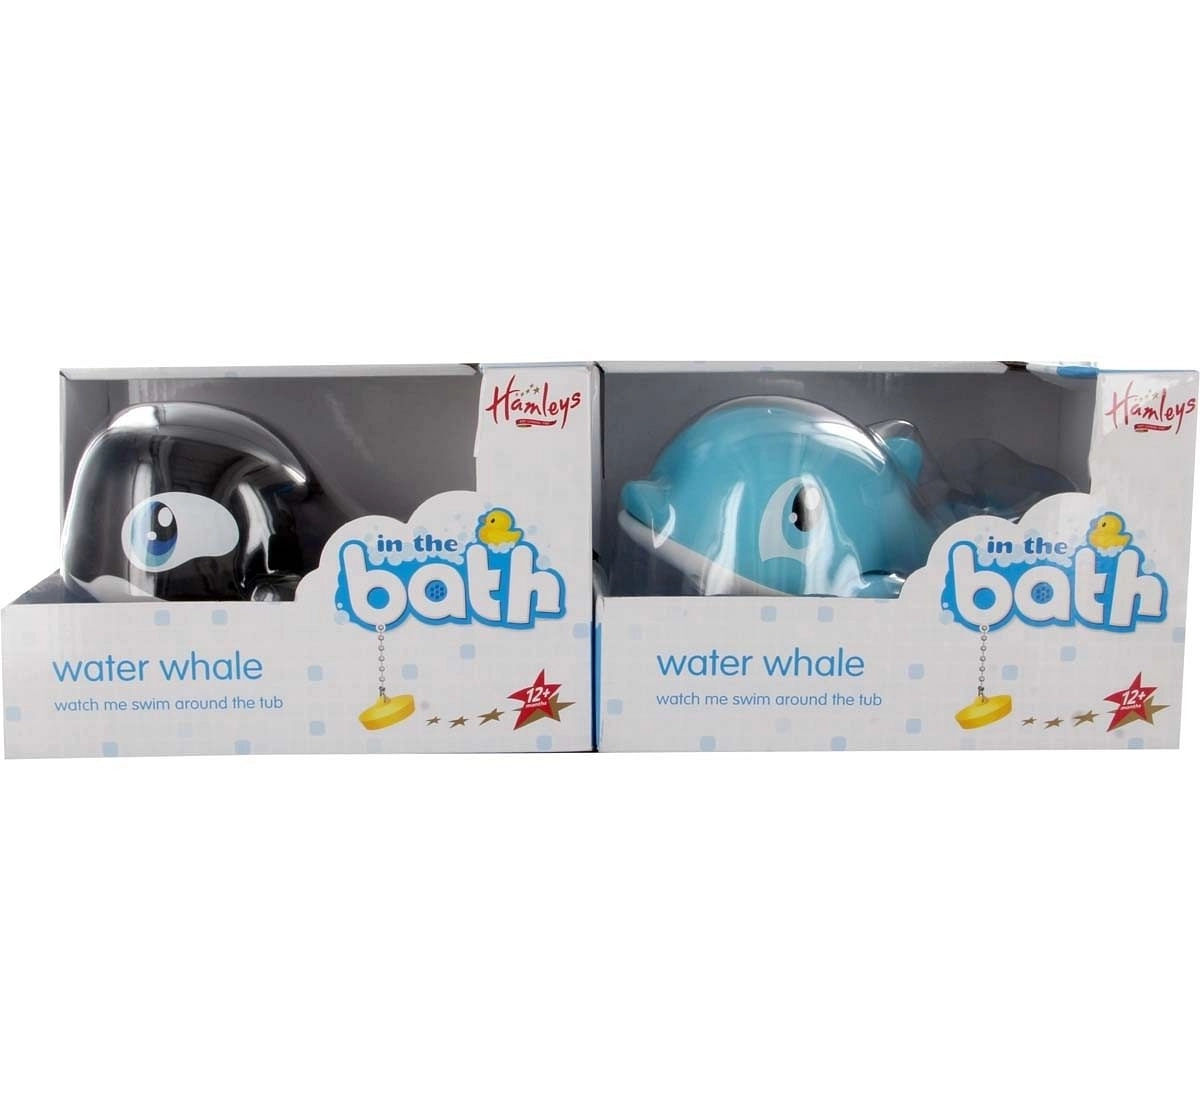 Hamleys Water Whale Bathing Toys & Accessories for Kids age 12M+ 